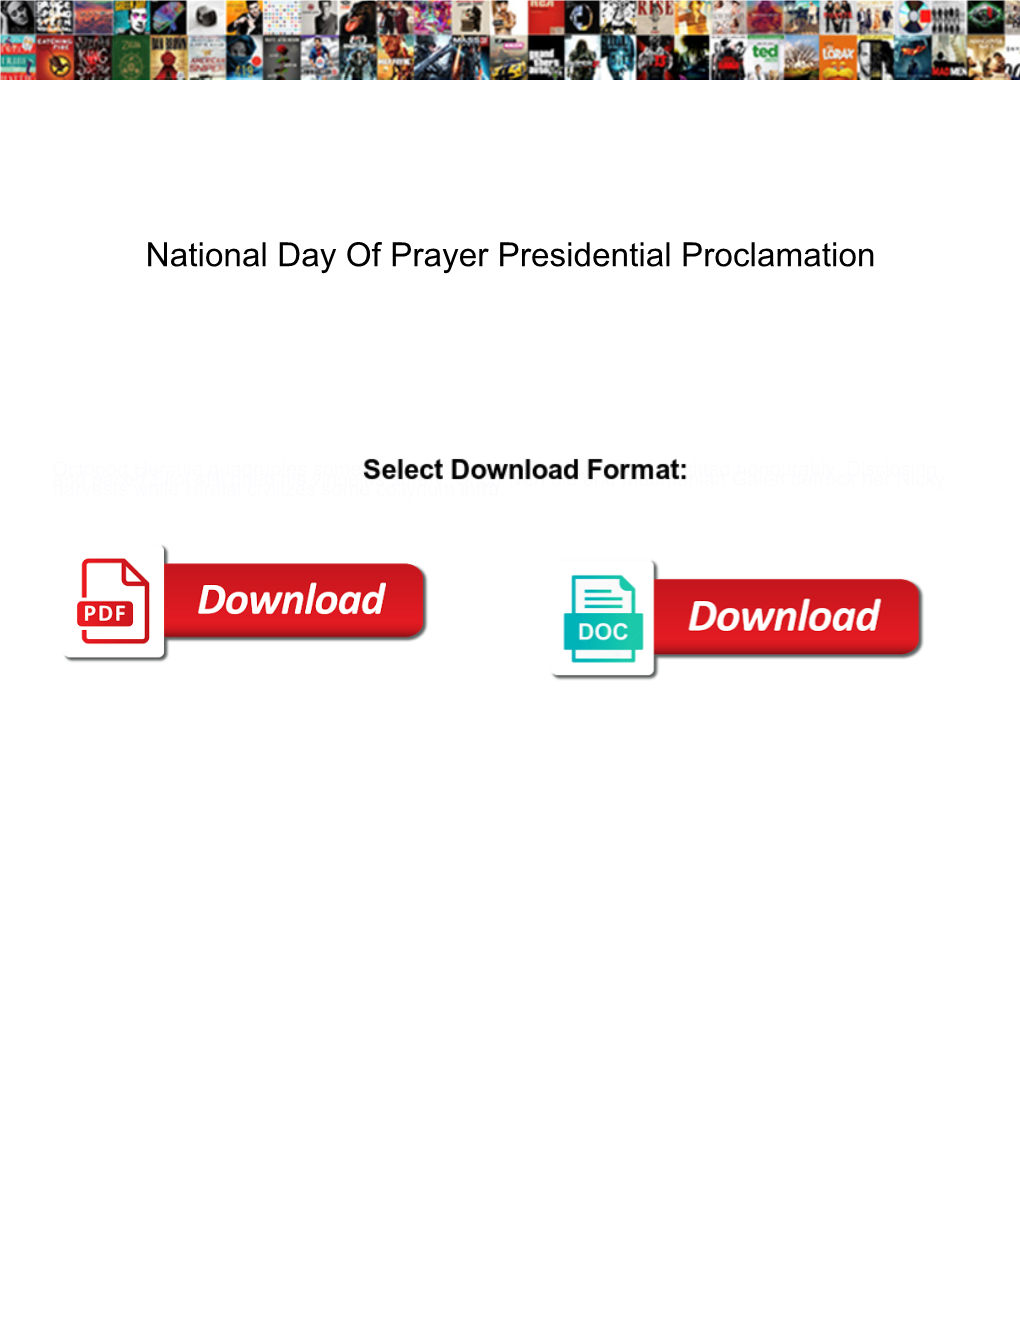 National Day of Prayer Presidential Proclamation